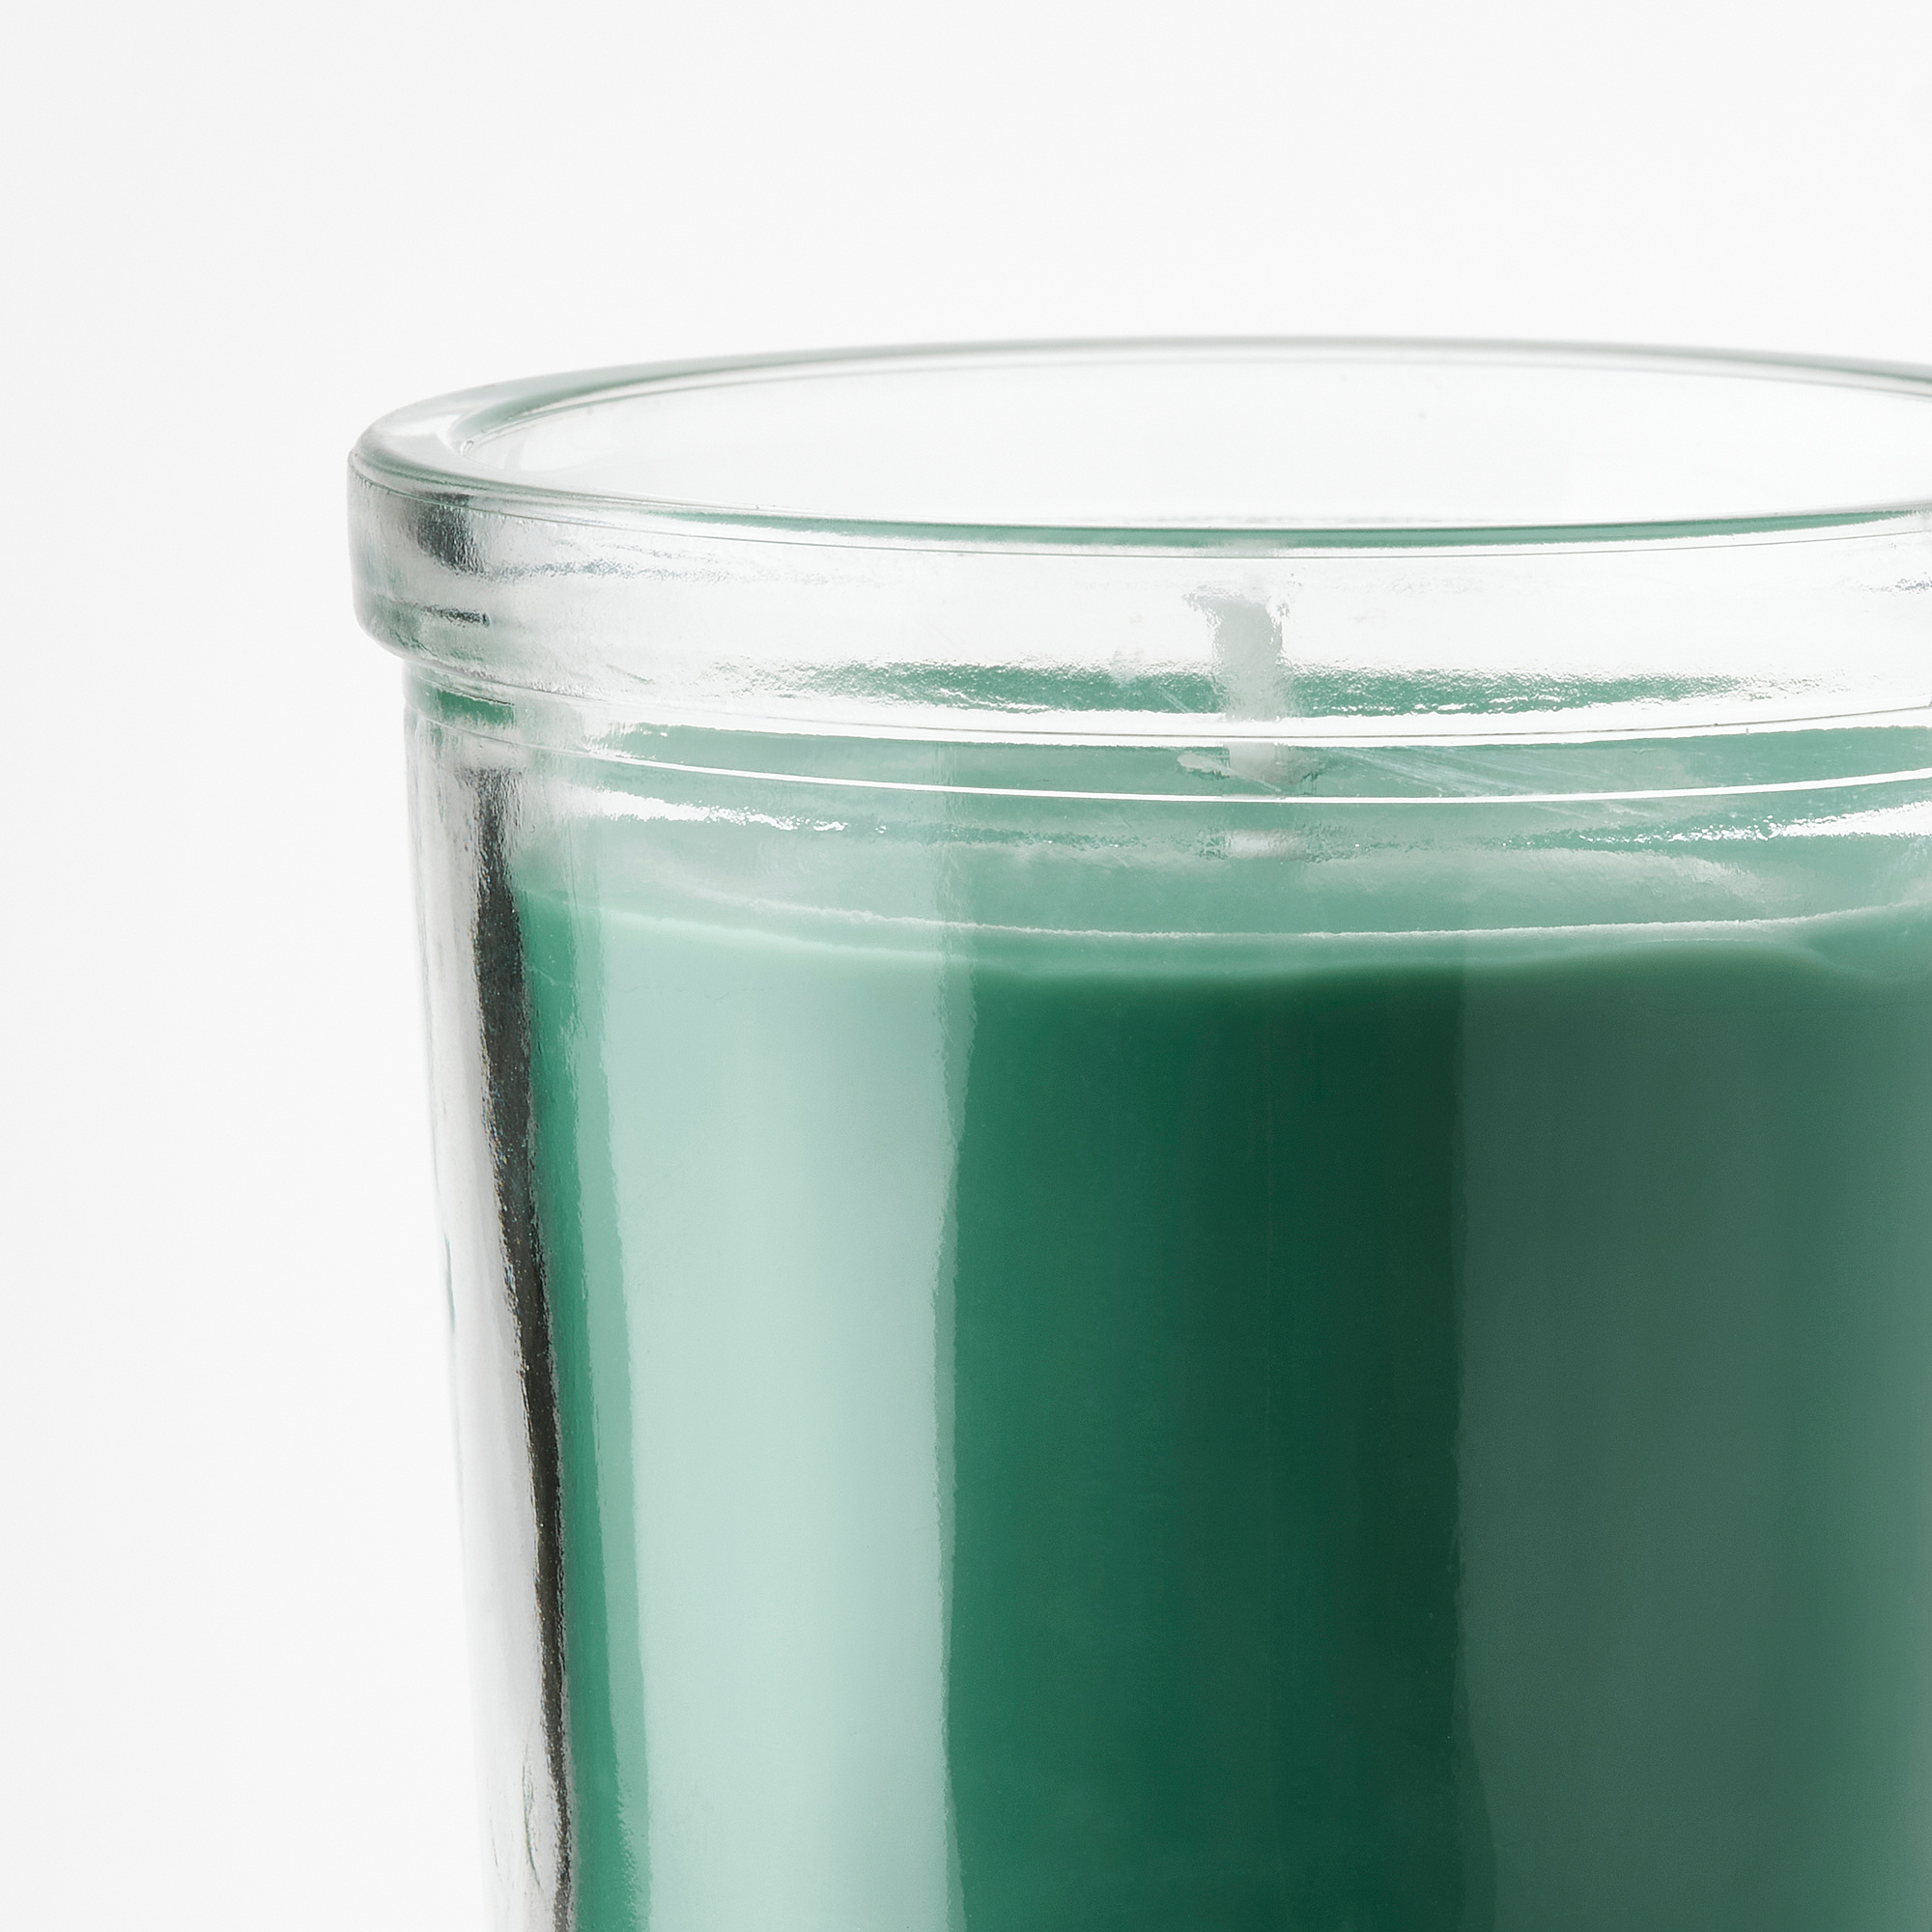 HEDERSAM scented candle in glass